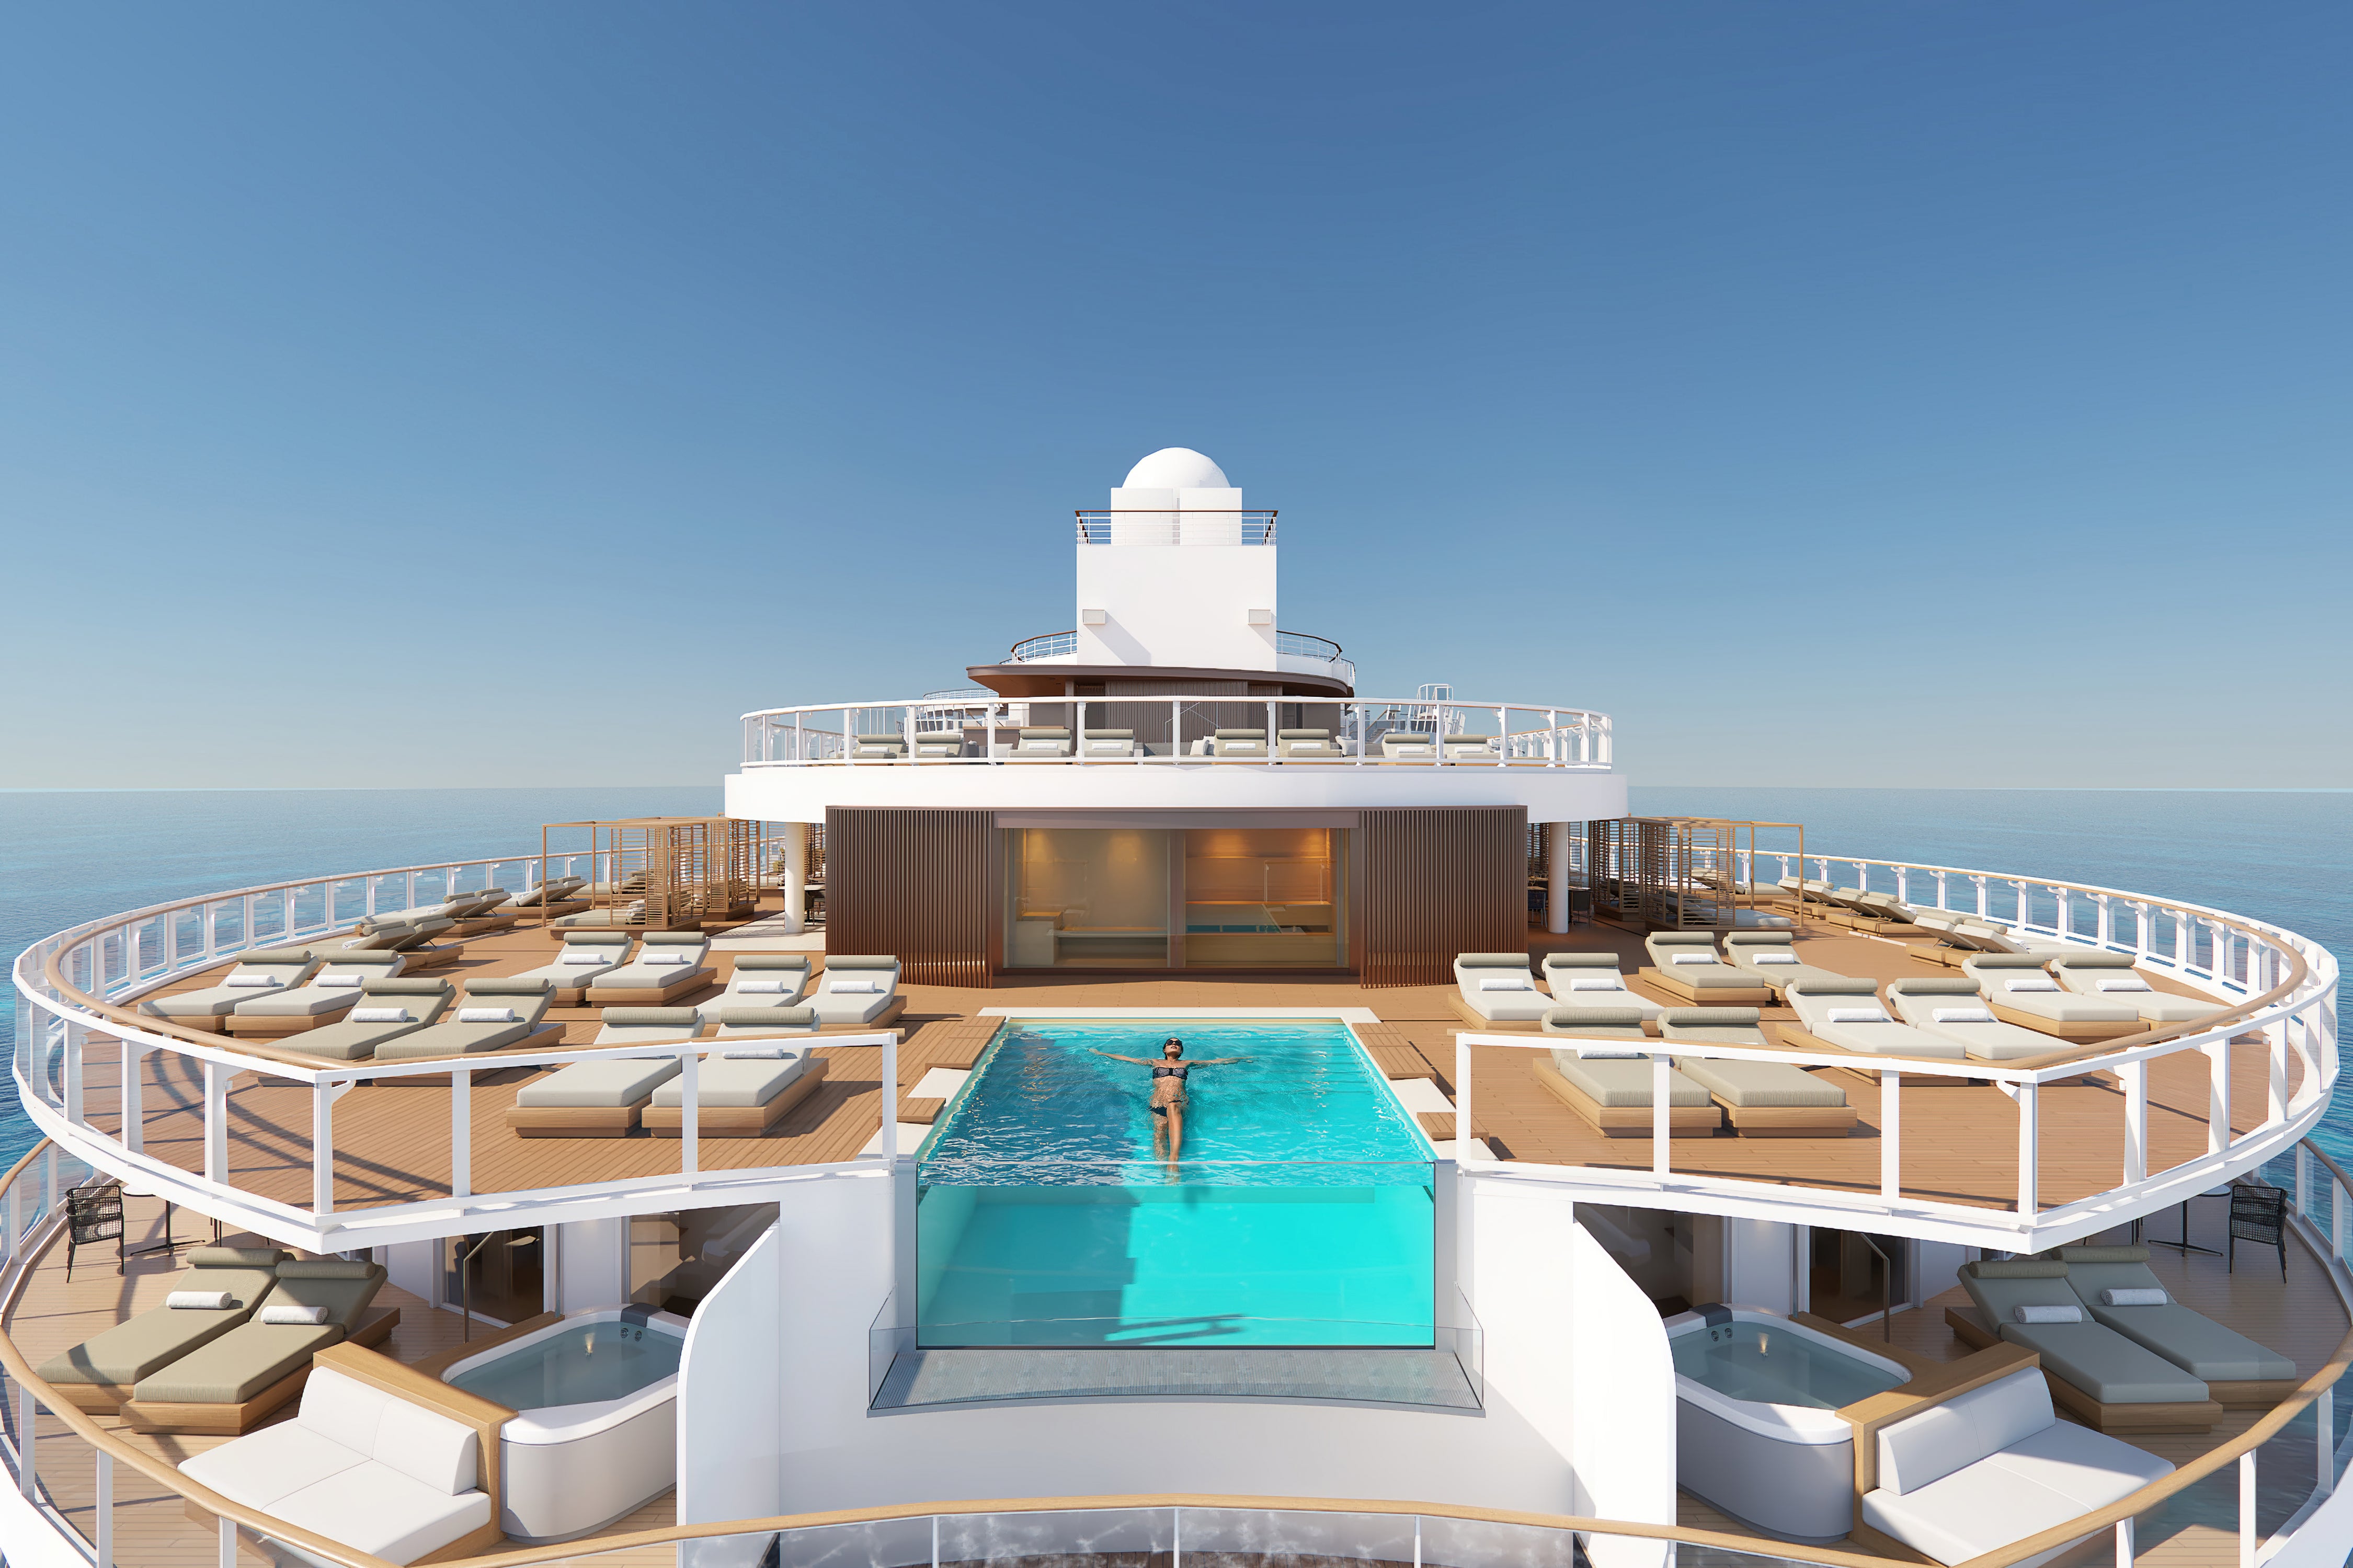 The Prima is a game-changing new cruise ship from Norwegian